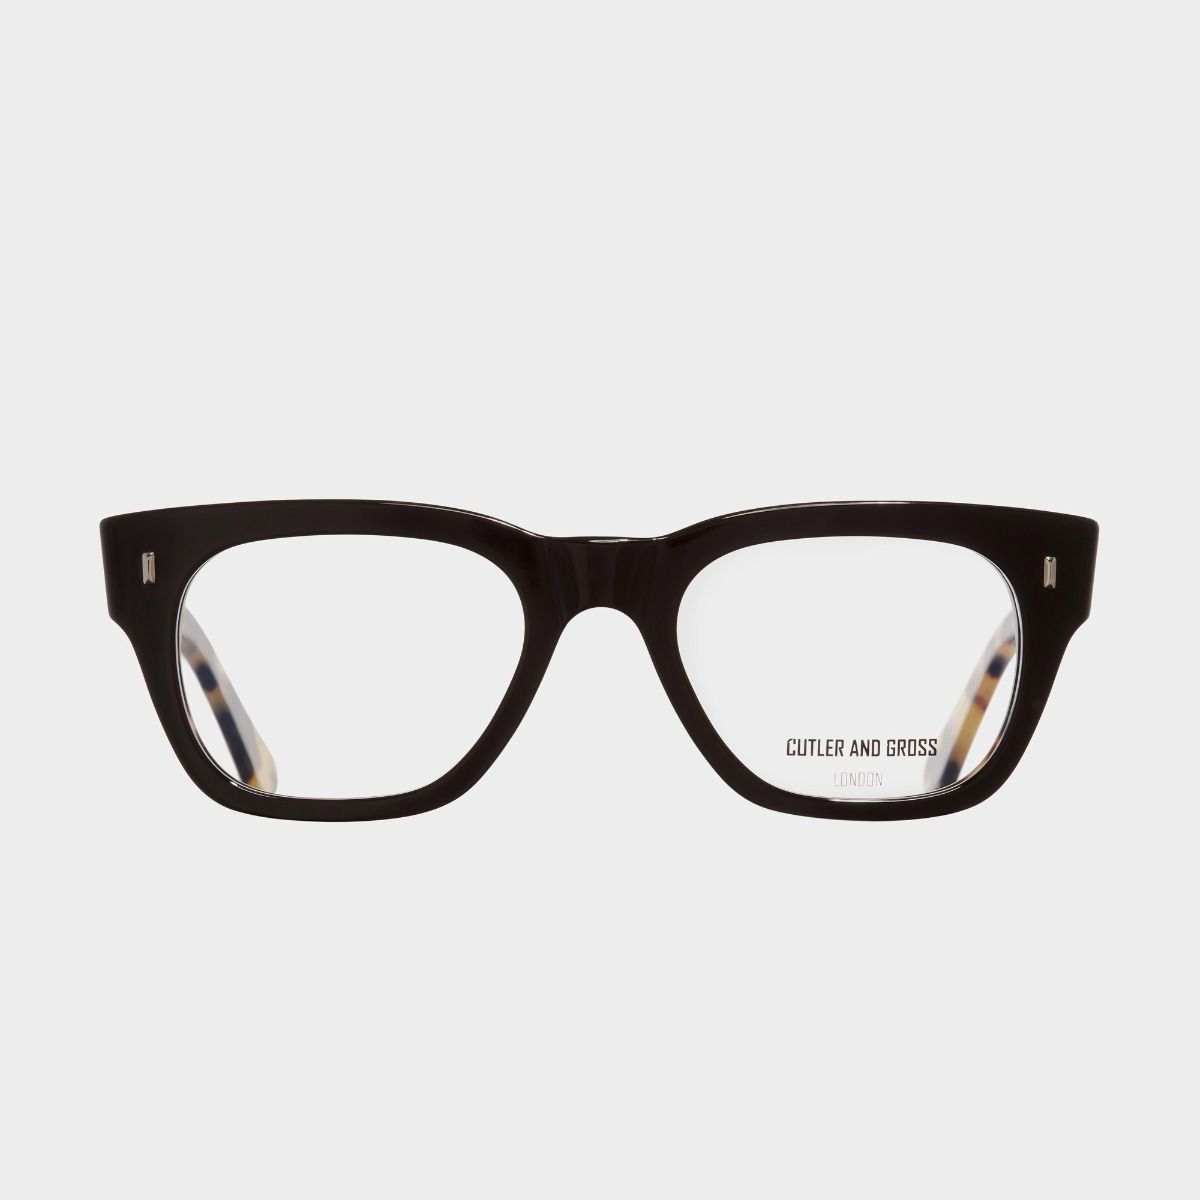 Cutler and Gross 0772V2 Optical Square Glasses - Black on Camo